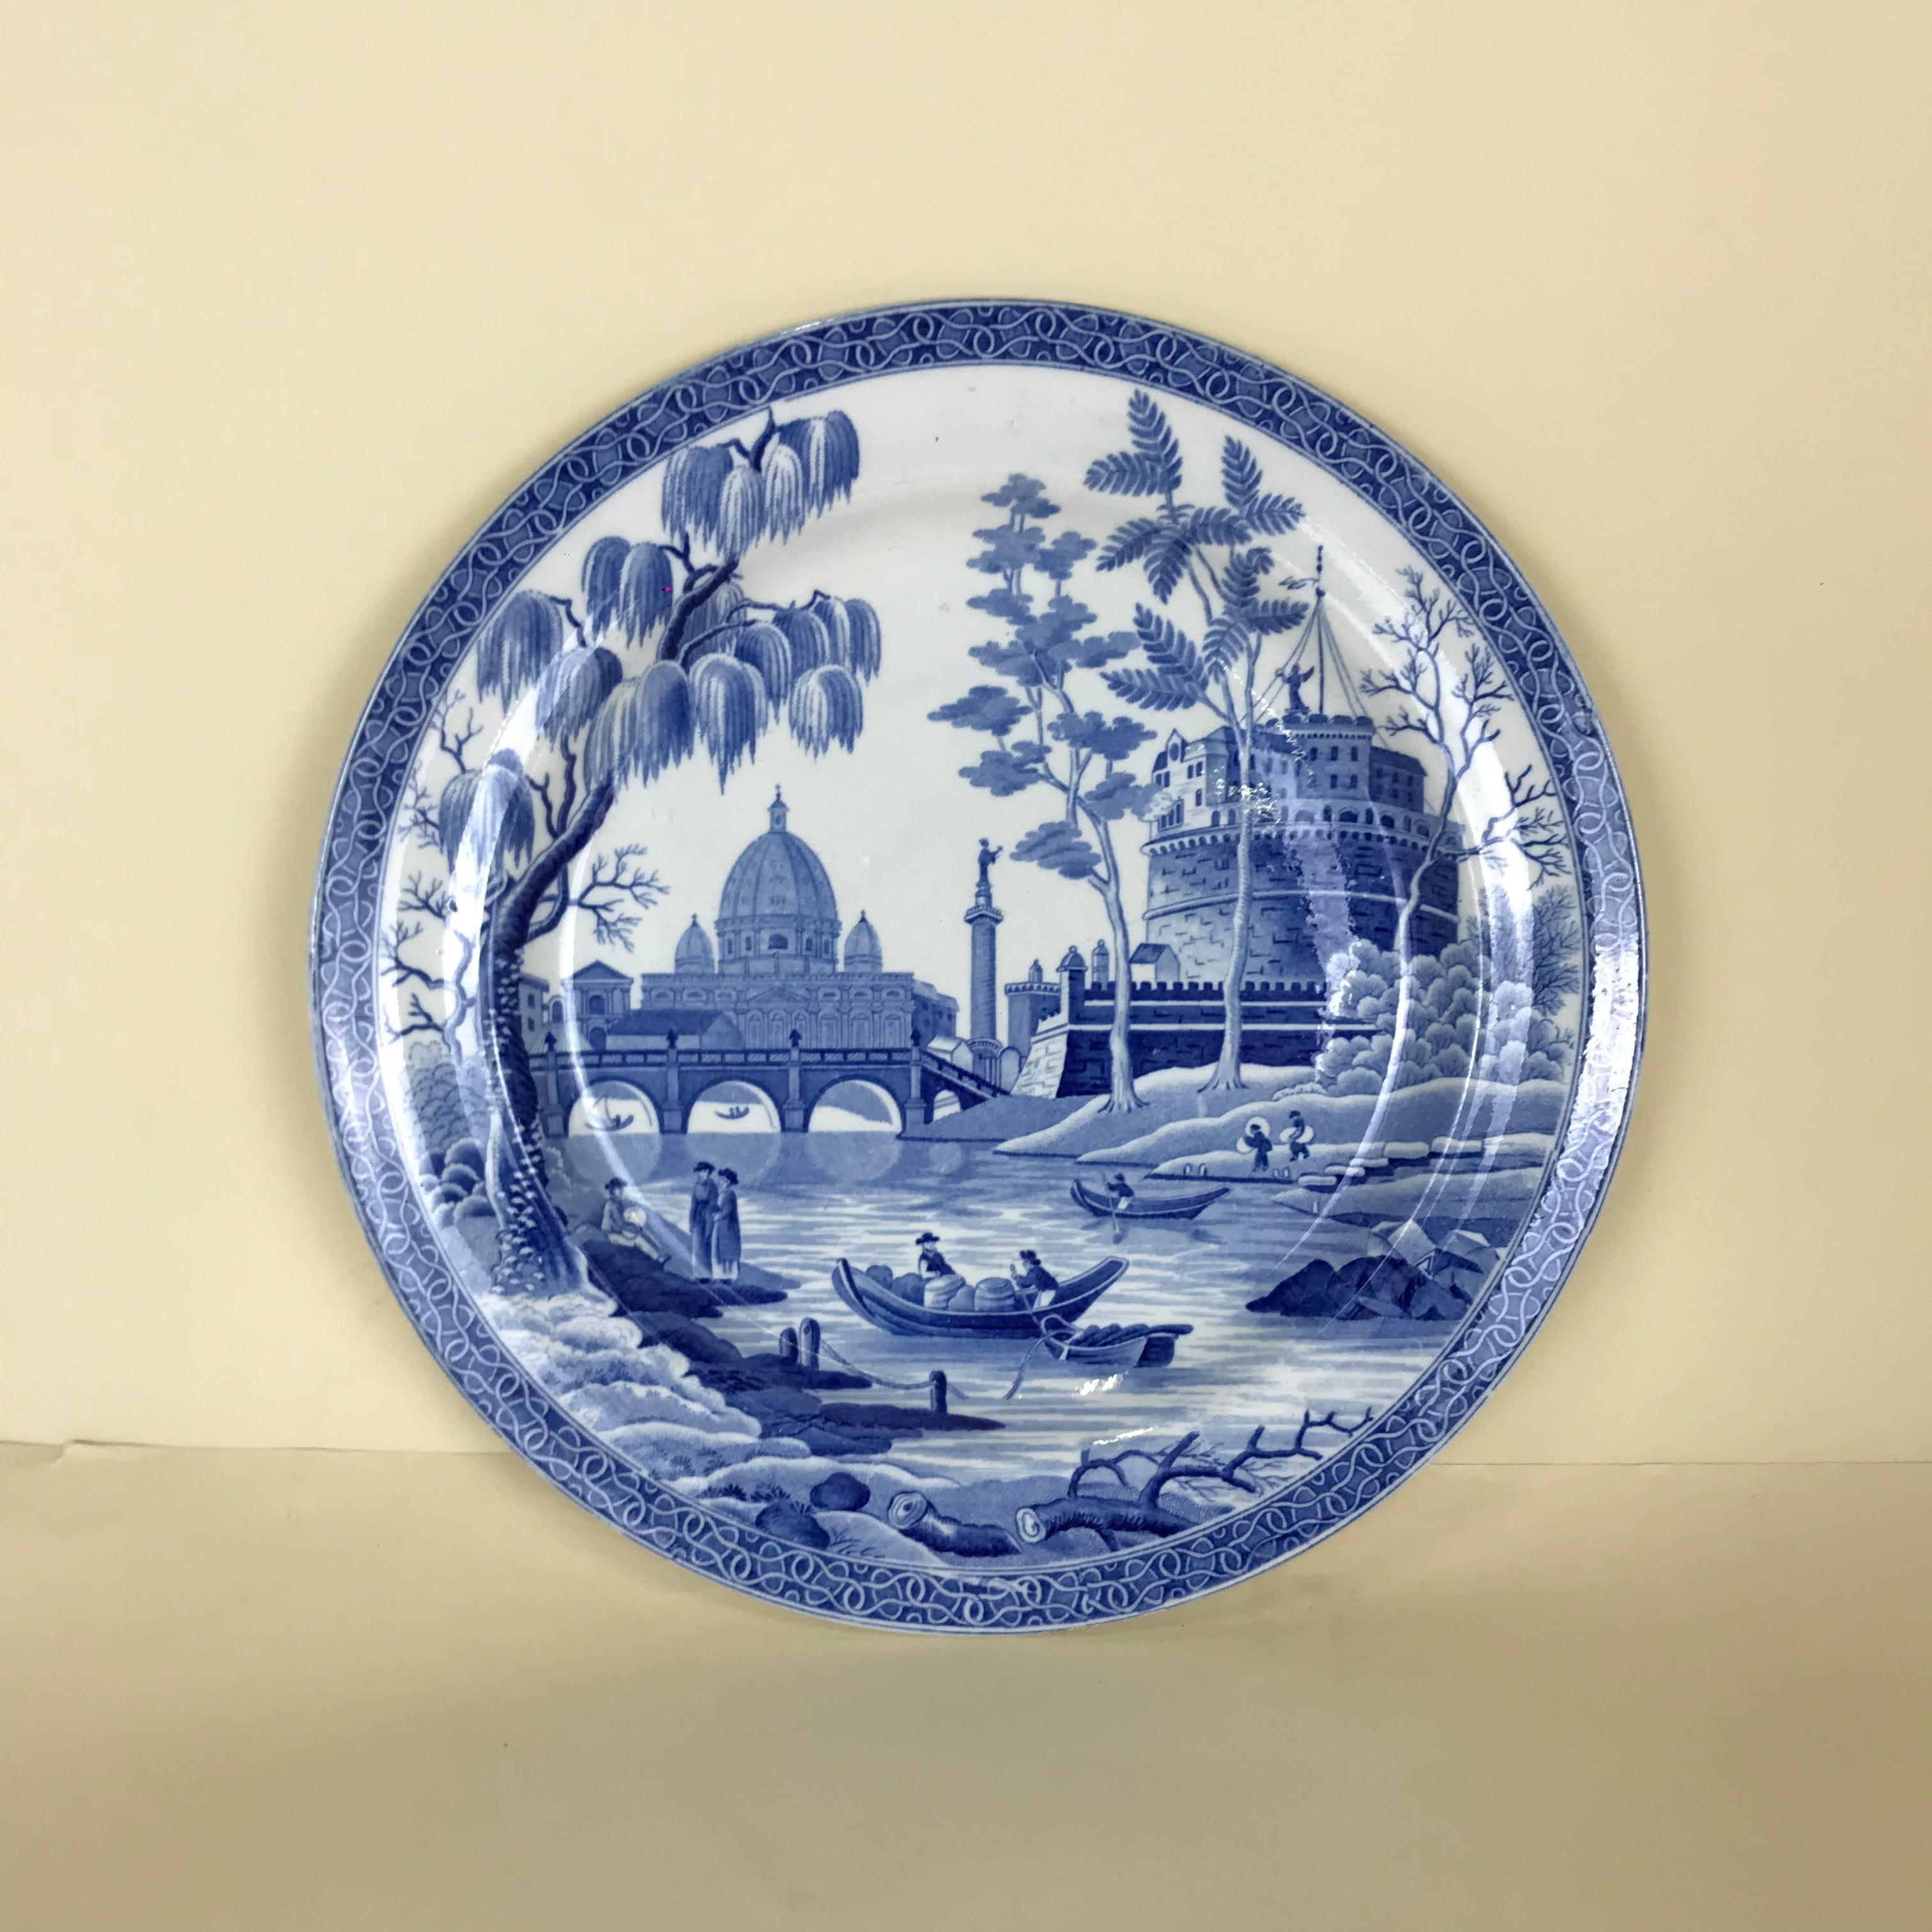 Antique English blue and white transfer dinner plate made in Stoke-on-Trent, and printed in the 